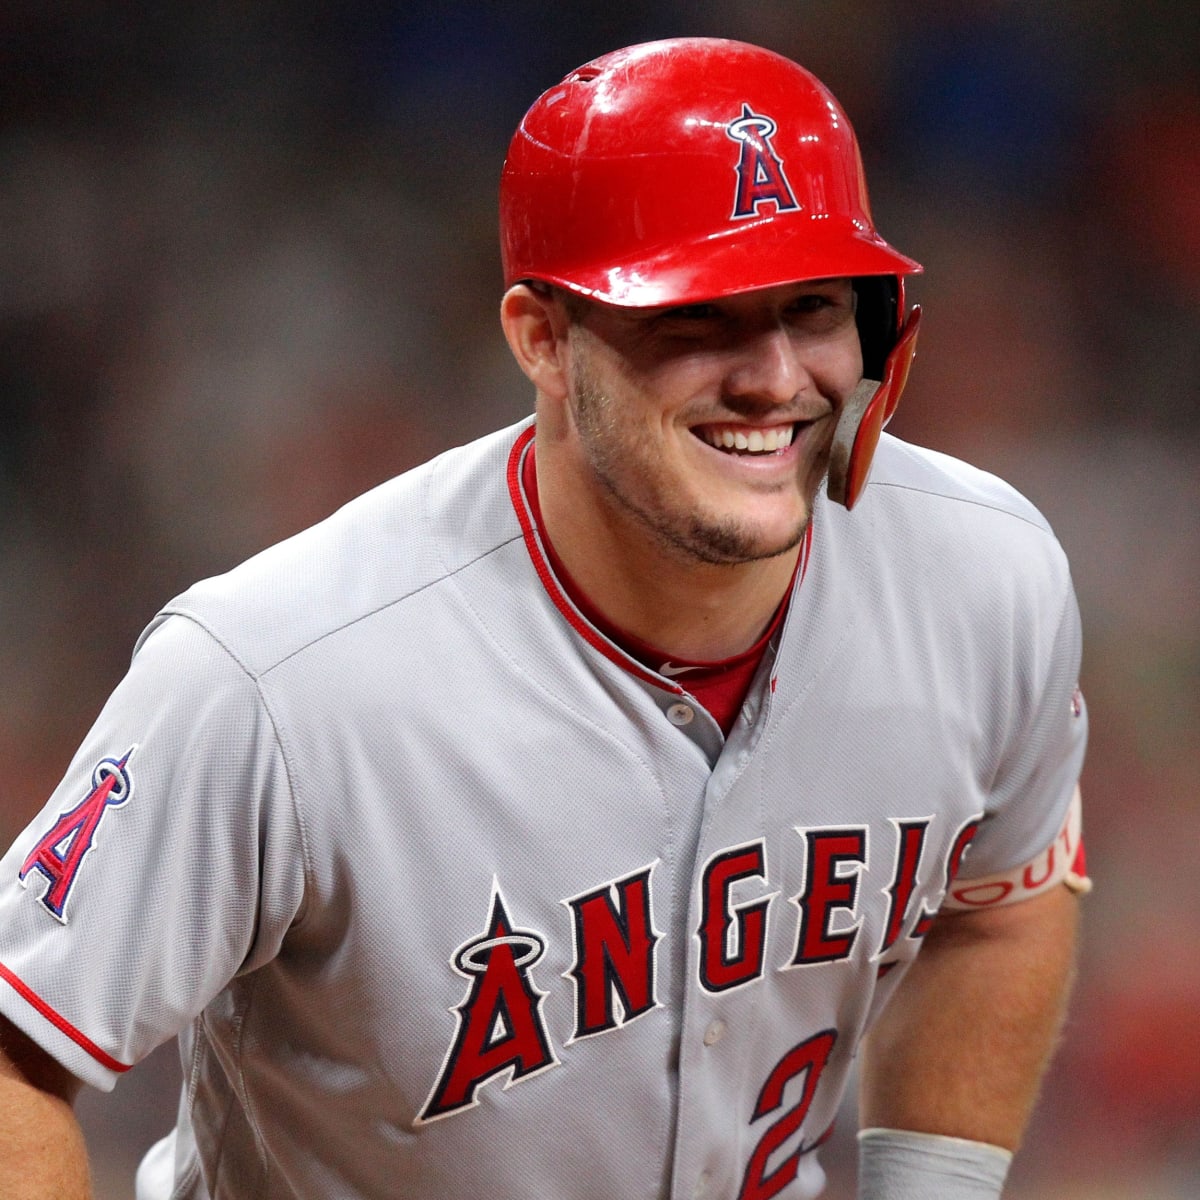 Mike Trout 2012 Action Sports Photo 